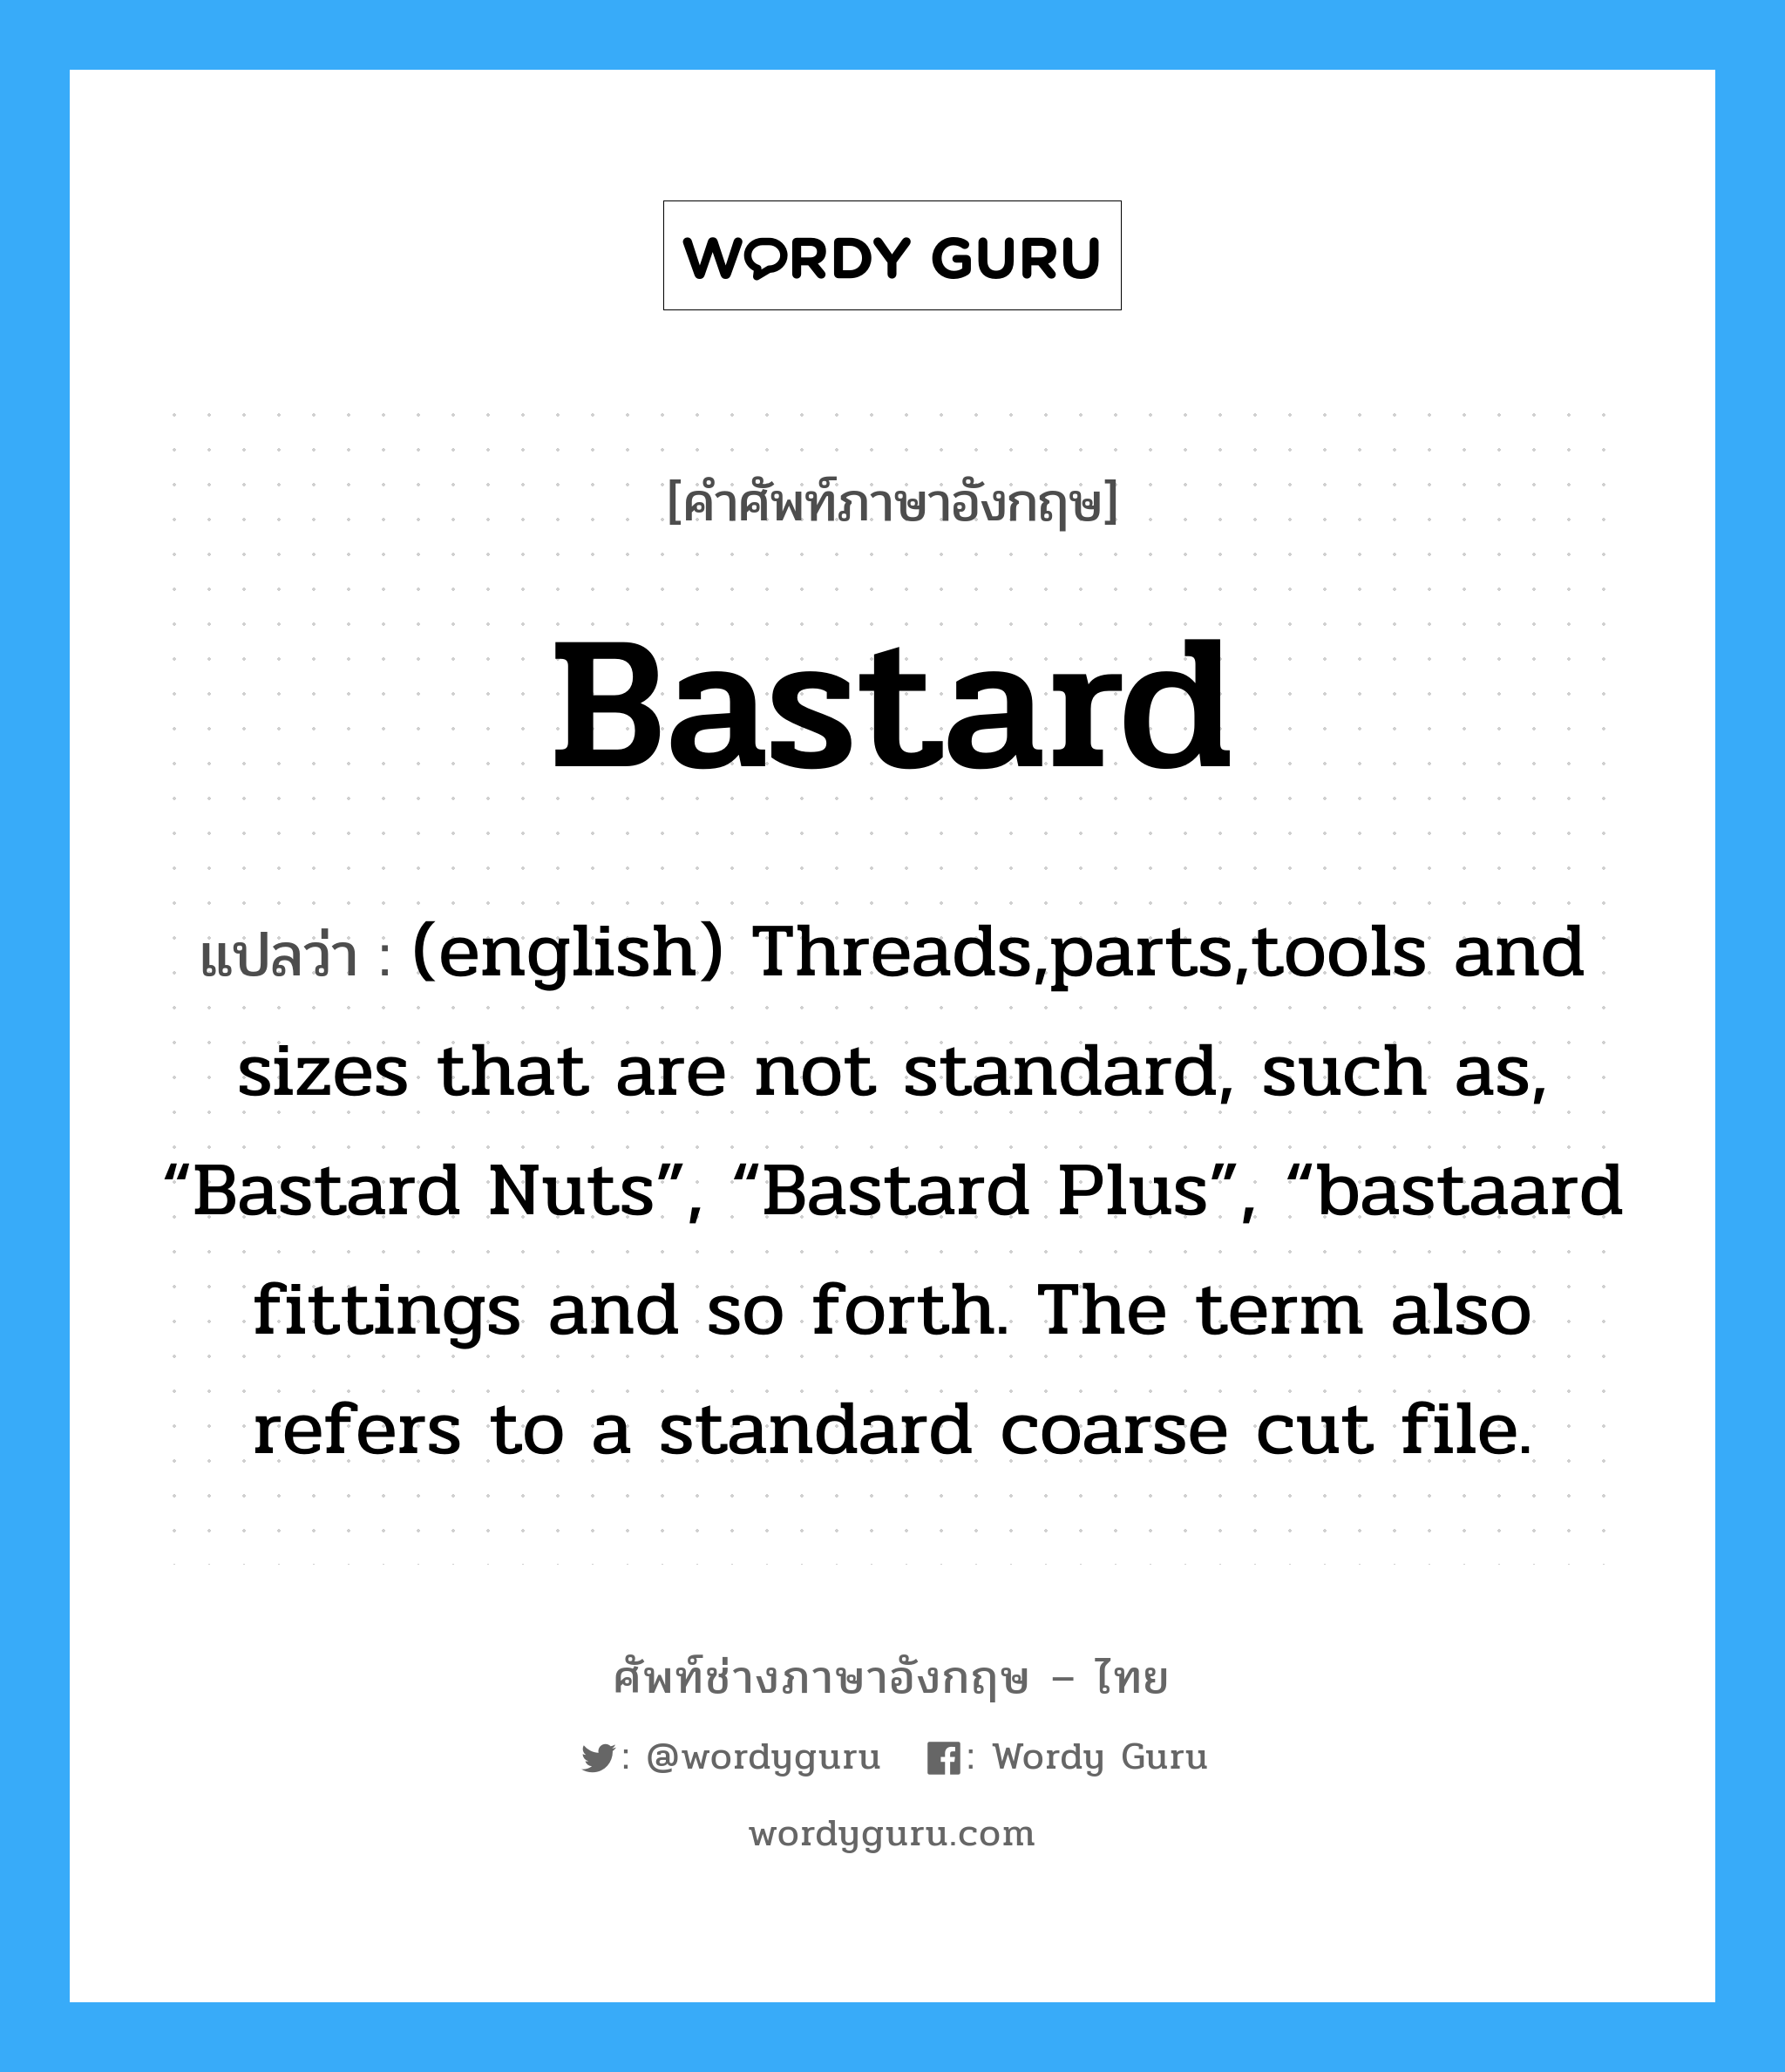 (english) Threads,parts,tools and sizes that are not standard, such as, “Bastard Nuts”, “Bastard Plus”, “bastaard fittings and so forth. The term also refers to a standard coarse cut file. ภาษาอังกฤษ?, คำศัพท์ช่างภาษาอังกฤษ - ไทย (english) Threads,parts,tools and sizes that are not standard, such as, “Bastard Nuts”, “Bastard Plus”, “bastaard fittings and so forth. The term also refers to a standard coarse cut file. คำศัพท์ภาษาอังกฤษ (english) Threads,parts,tools and sizes that are not standard, such as, “Bastard Nuts”, “Bastard Plus”, “bastaard fittings and so forth. The term also refers to a standard coarse cut file. แปลว่า Bastard